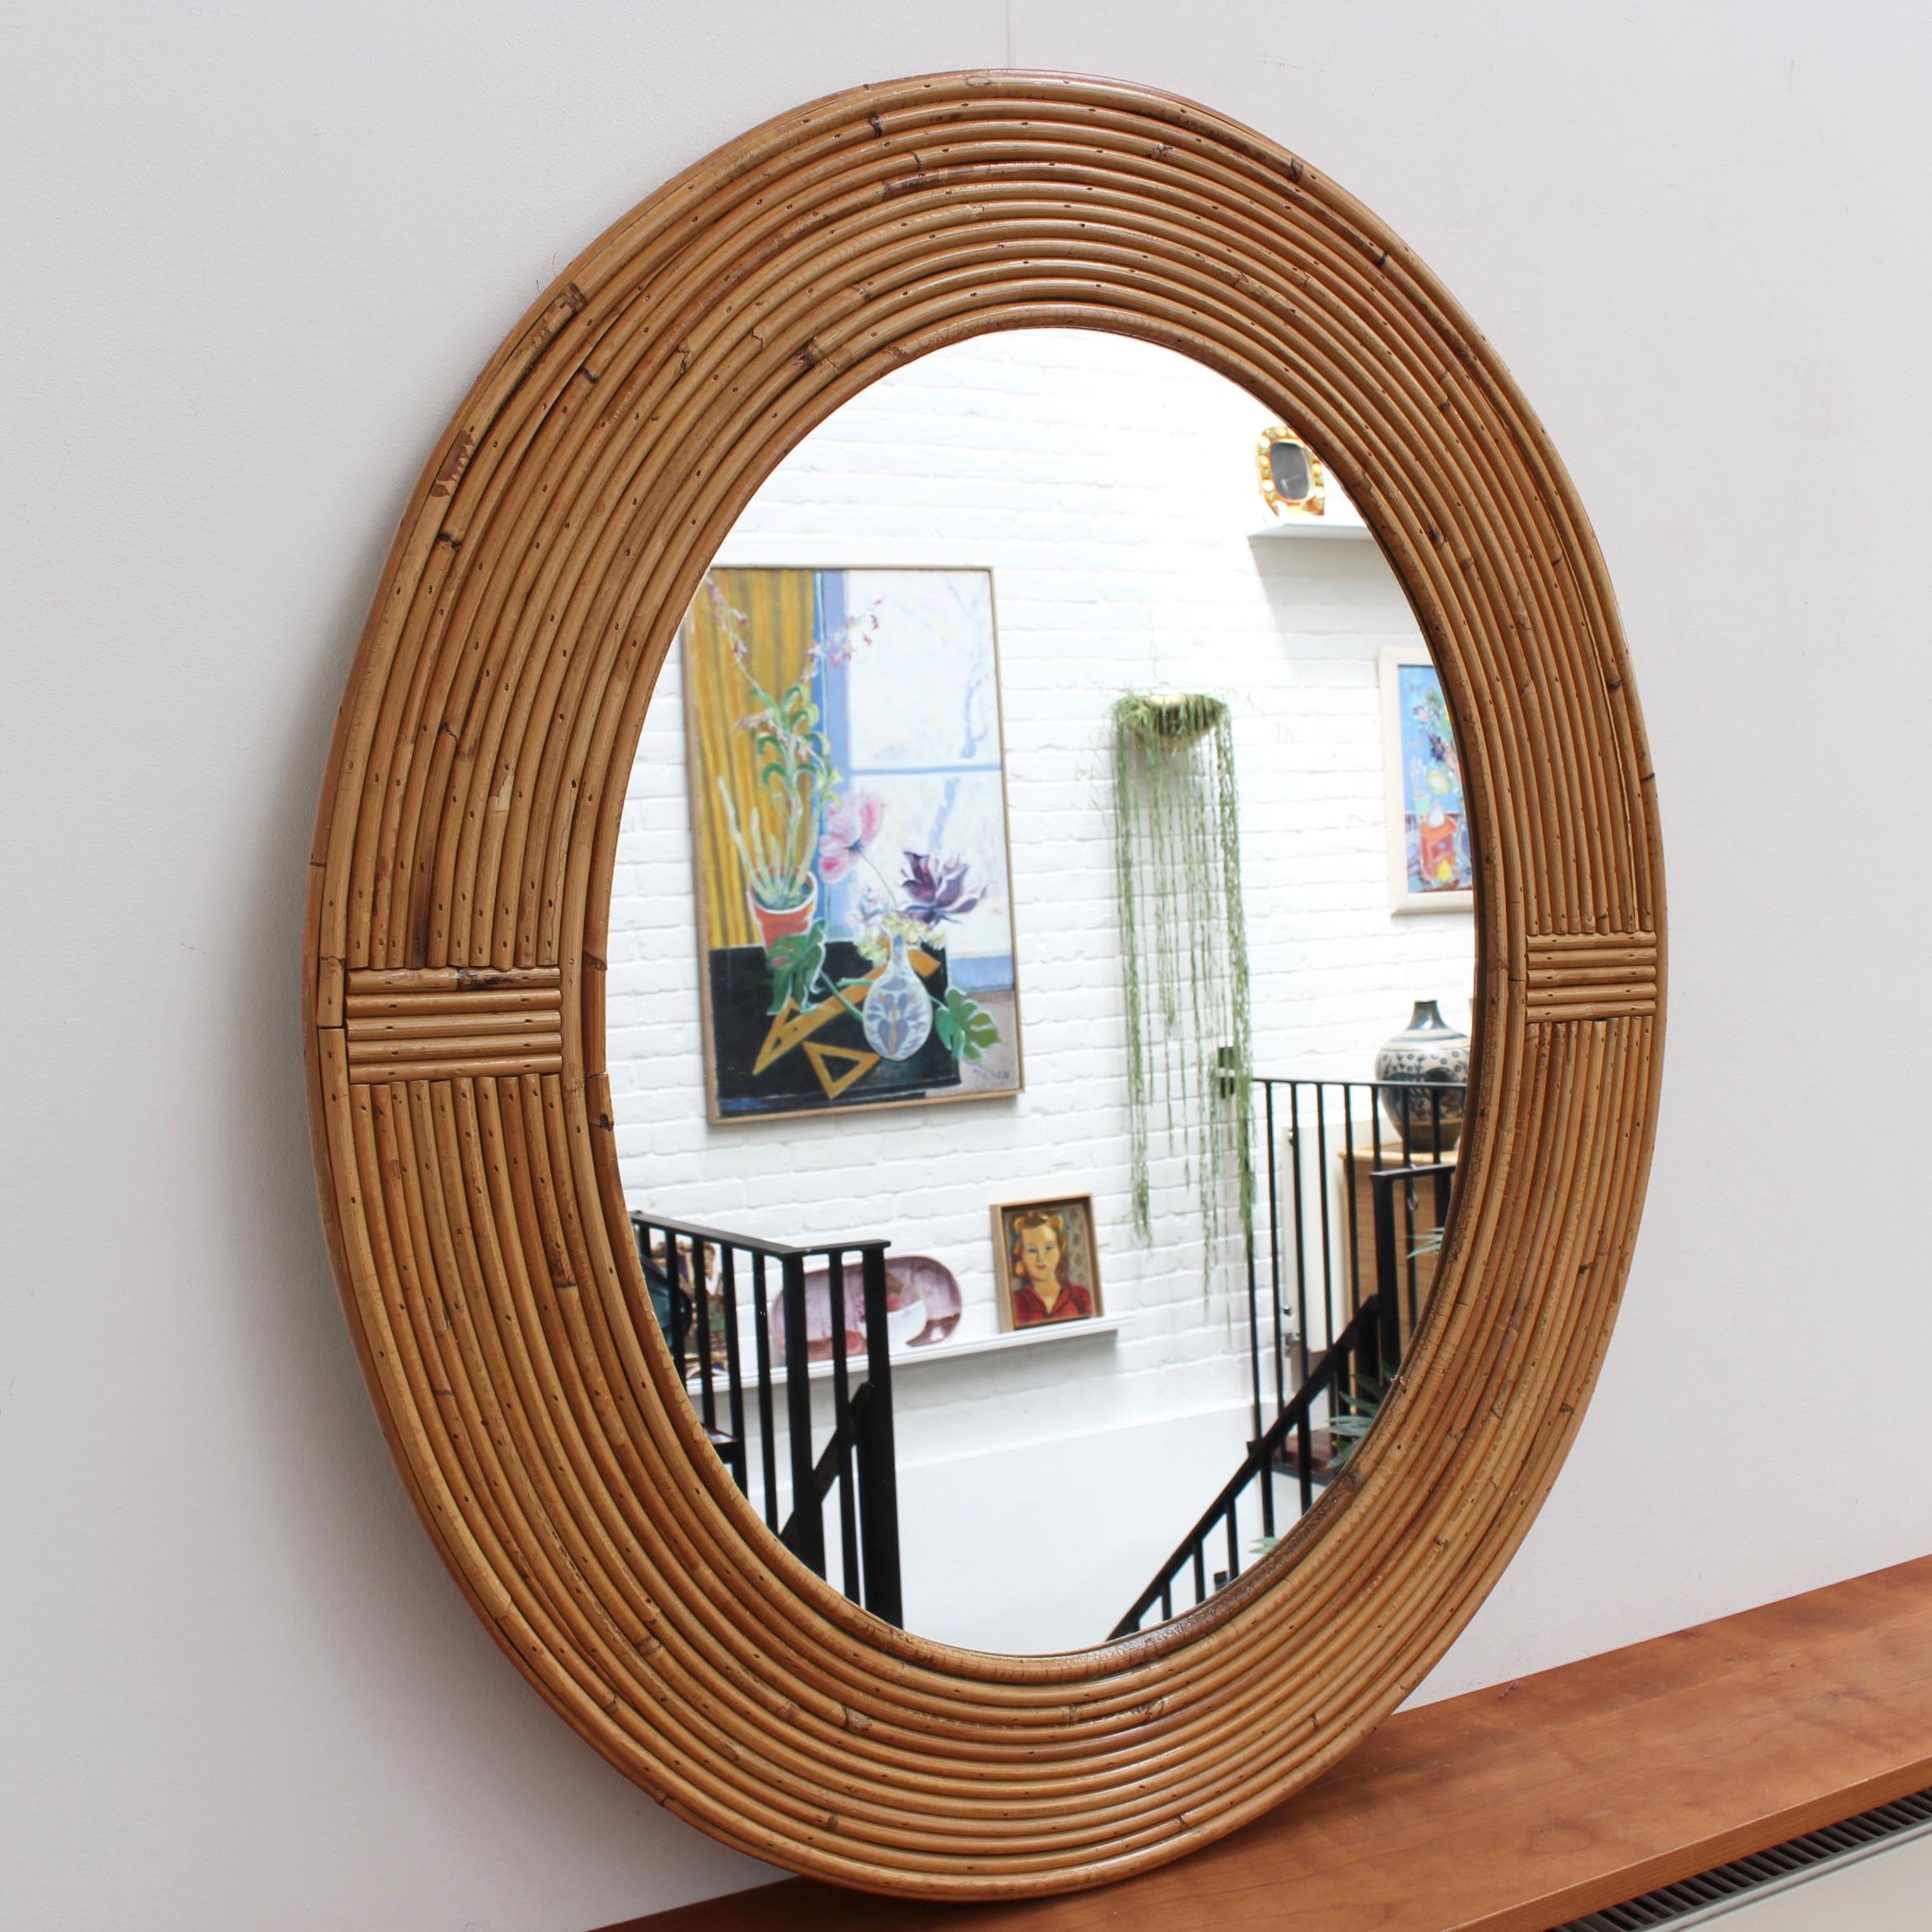 Vintage French rattan wall mirror circa 1960s. A dozen concentric tubular rounds of rattan form the structural frame for this stunning oval mirror. The circles are punctuated at the sides / top (depending on how you choose to hang it) by horizontal